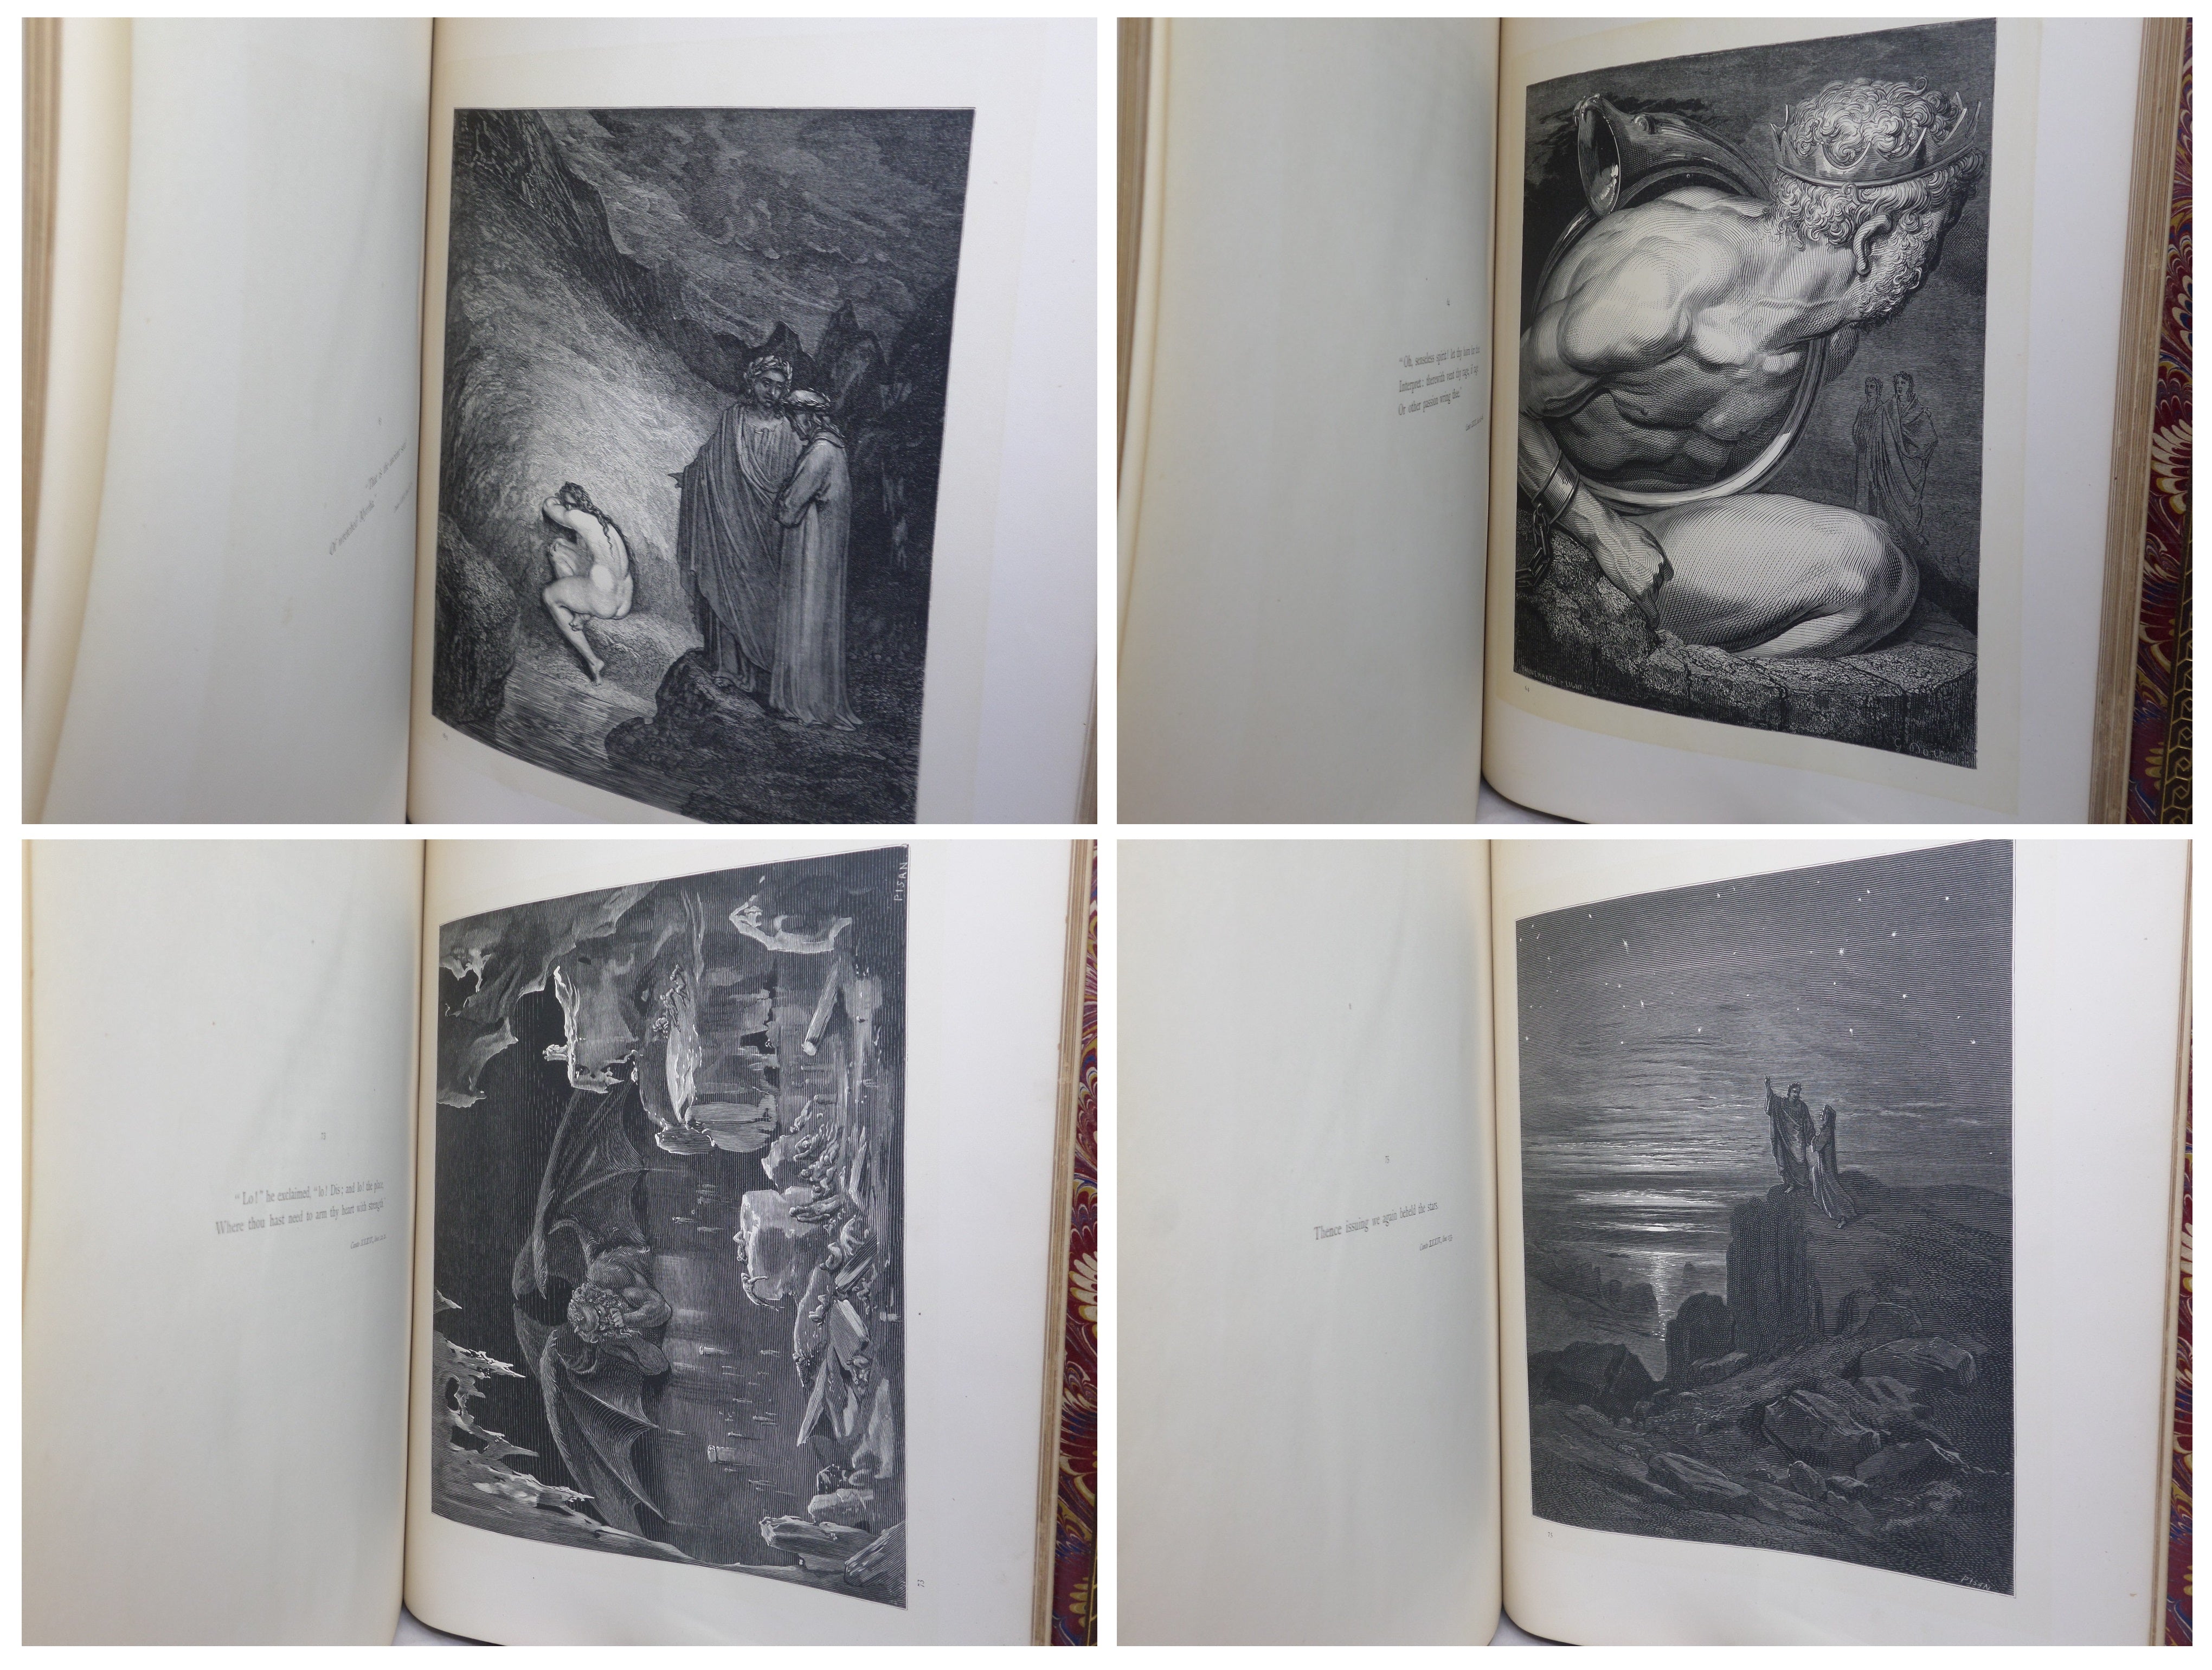 THE VISION OF HELL BY DANTE ALIGHIERI 1868 FOLIO LEATHER BINDING, GUSTAVE DORE ILLUSTRATIONS